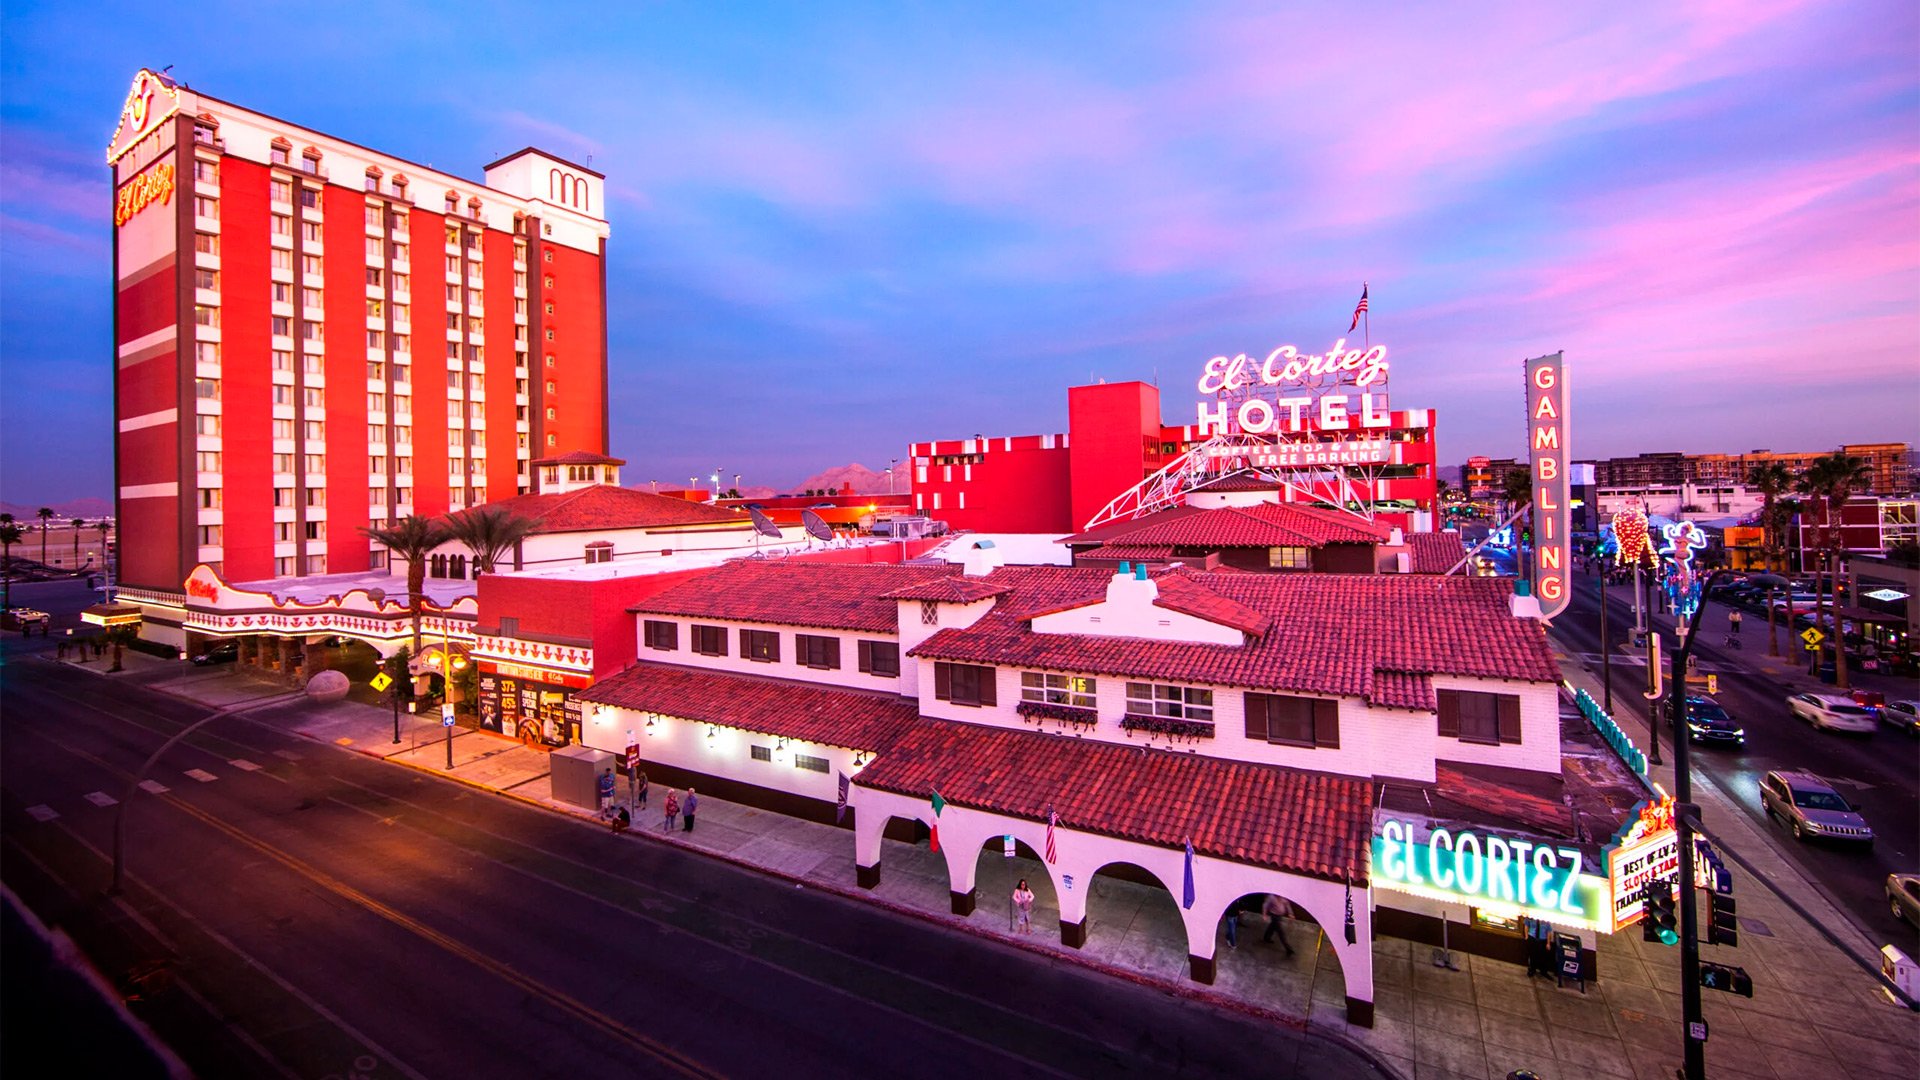 Las Vegas' El Cortez to open new bars, expand gaming floor while keeping  1941 original look intact